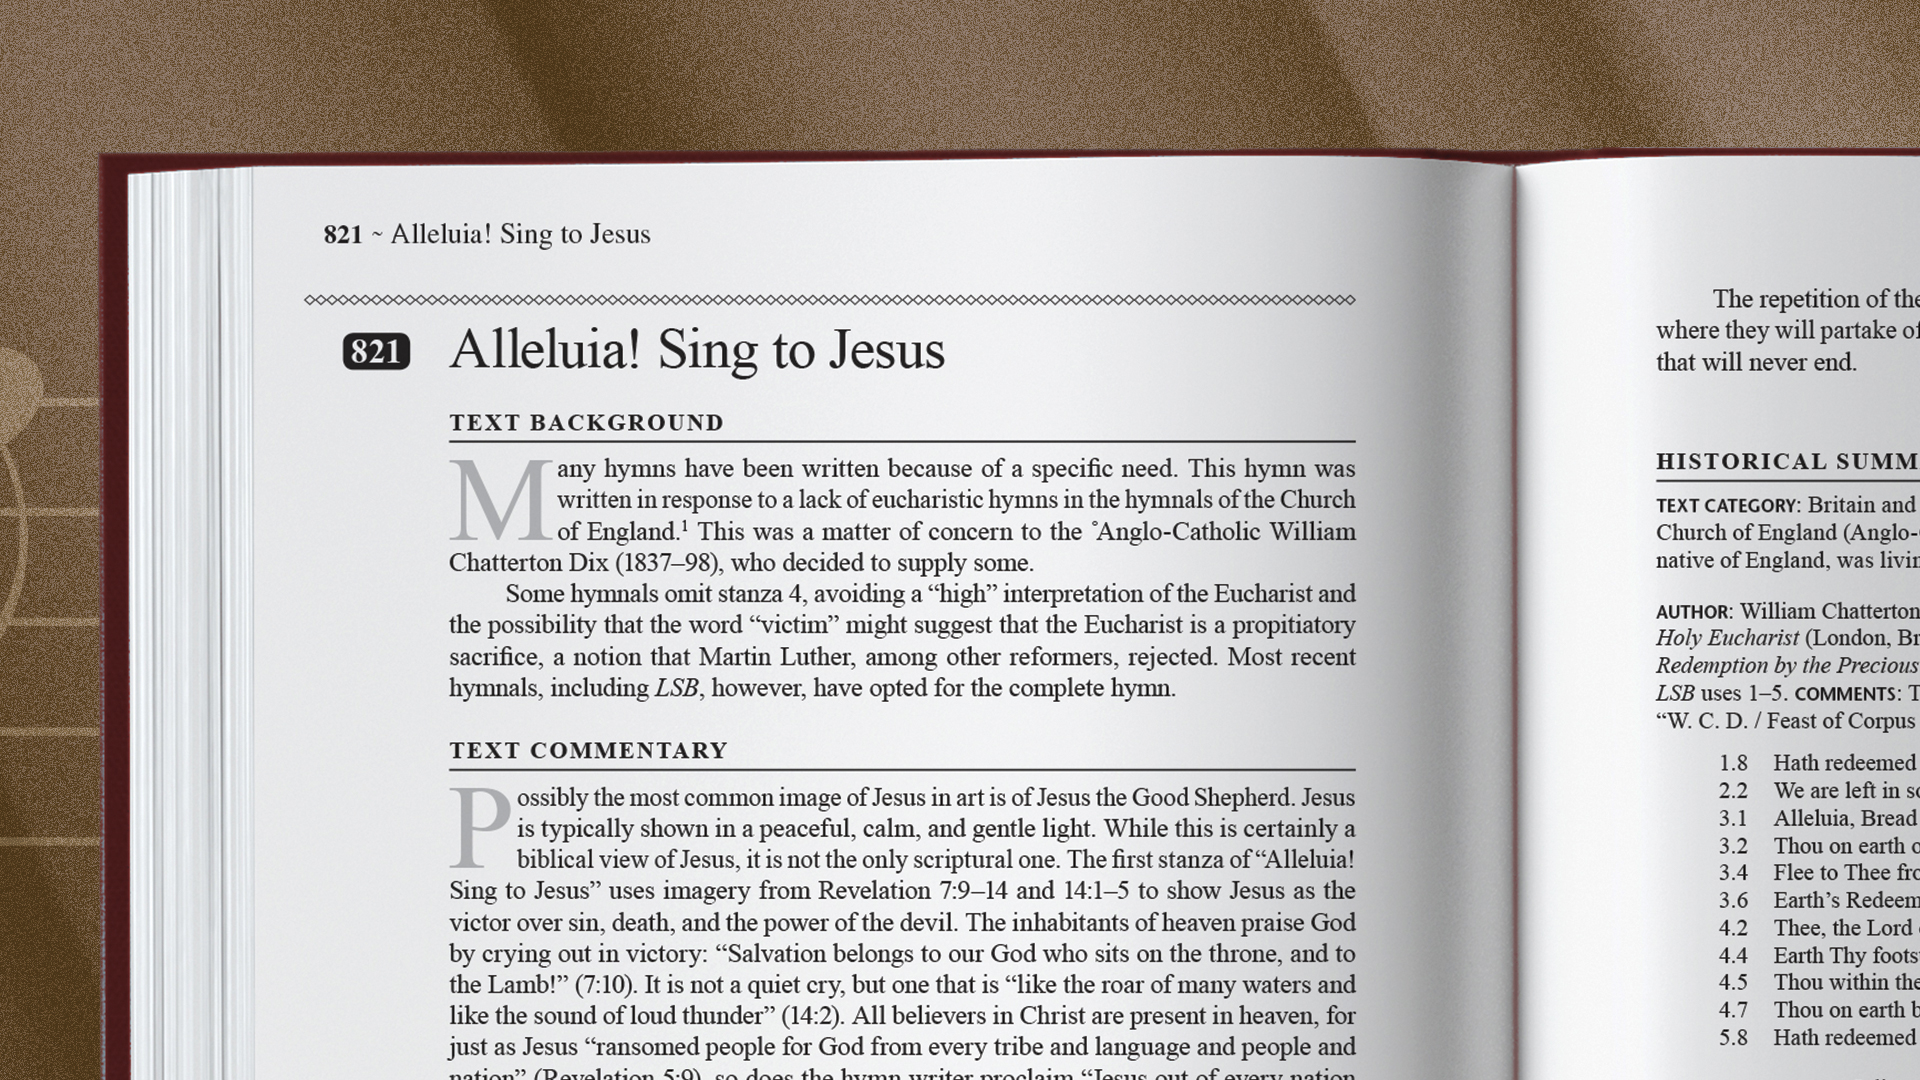 5 Fun Facts From The New Lsb Companion To The Hymns